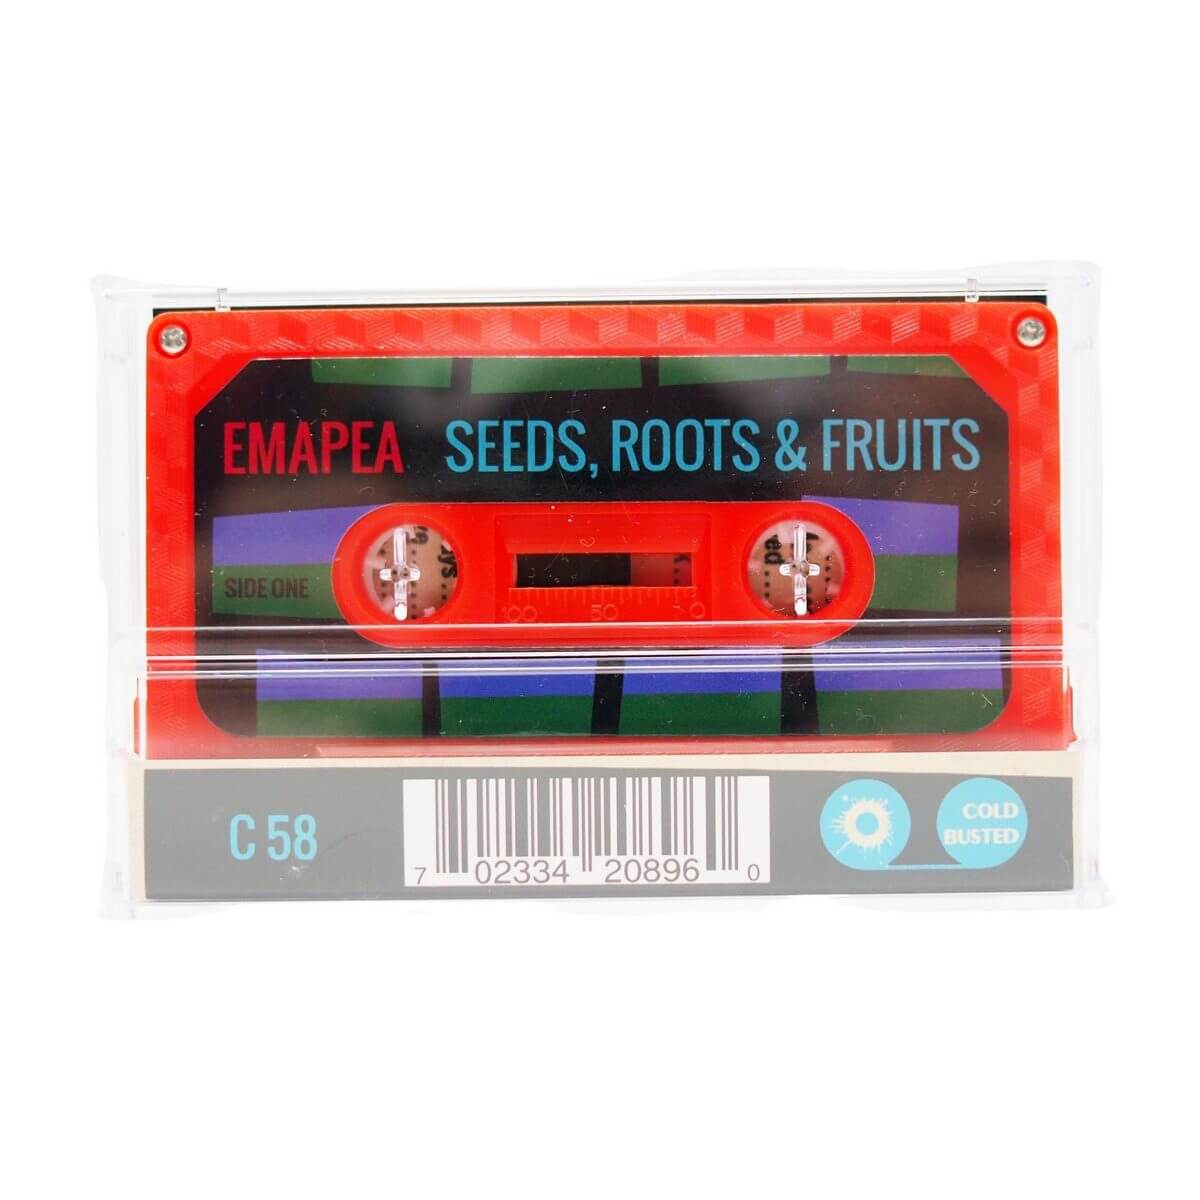 Emapea - Seeds, Roots & Fruits - Limited Edition Cassette Repress - Cold Busted